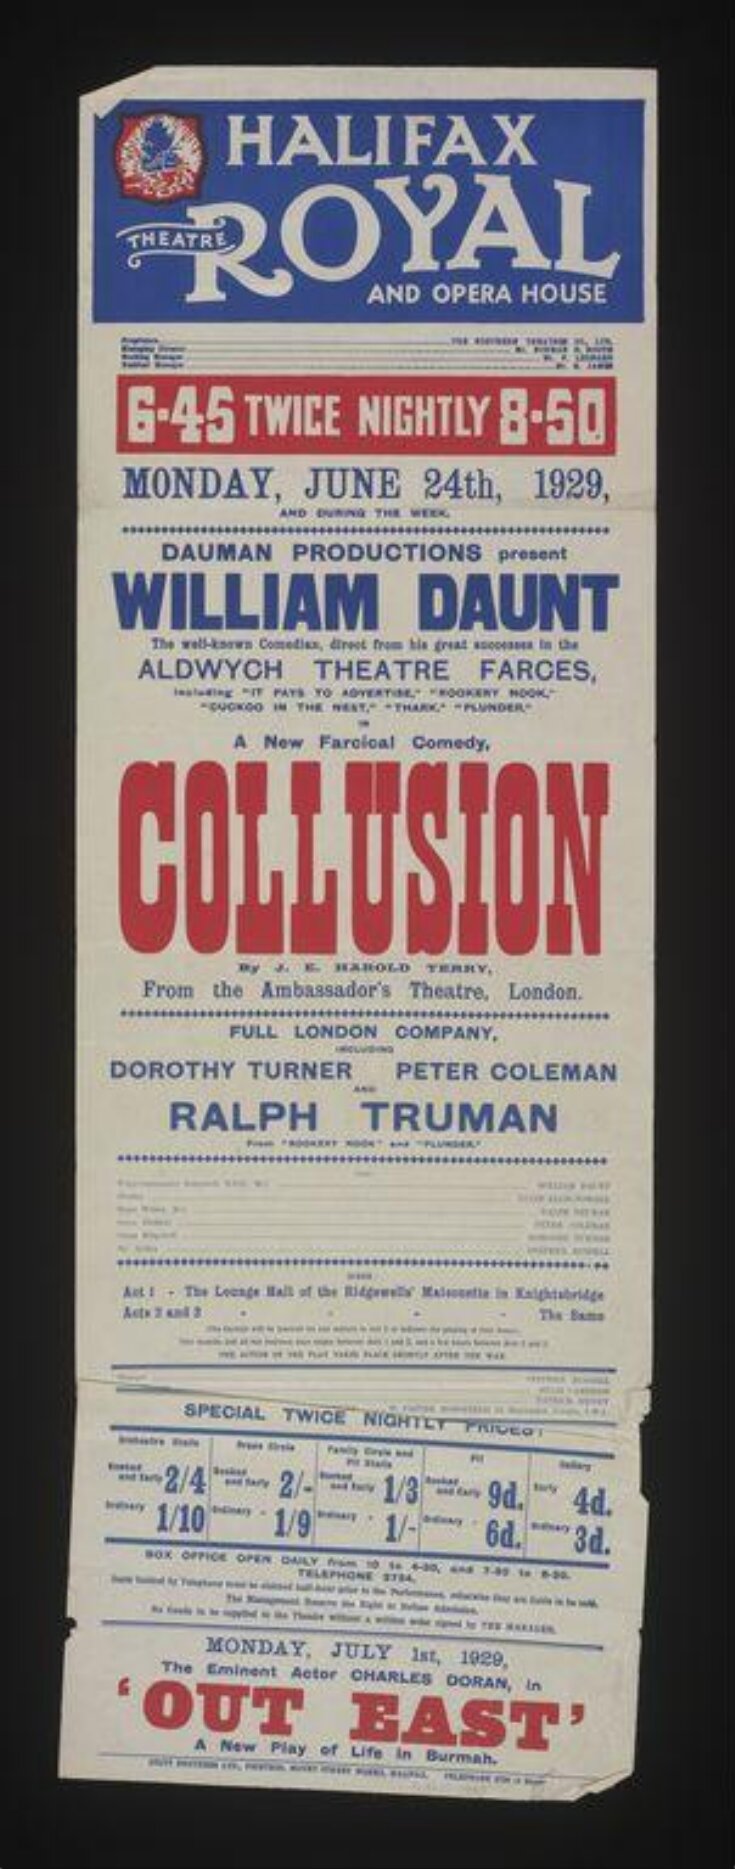 Theatre Royal and Opera House poster image